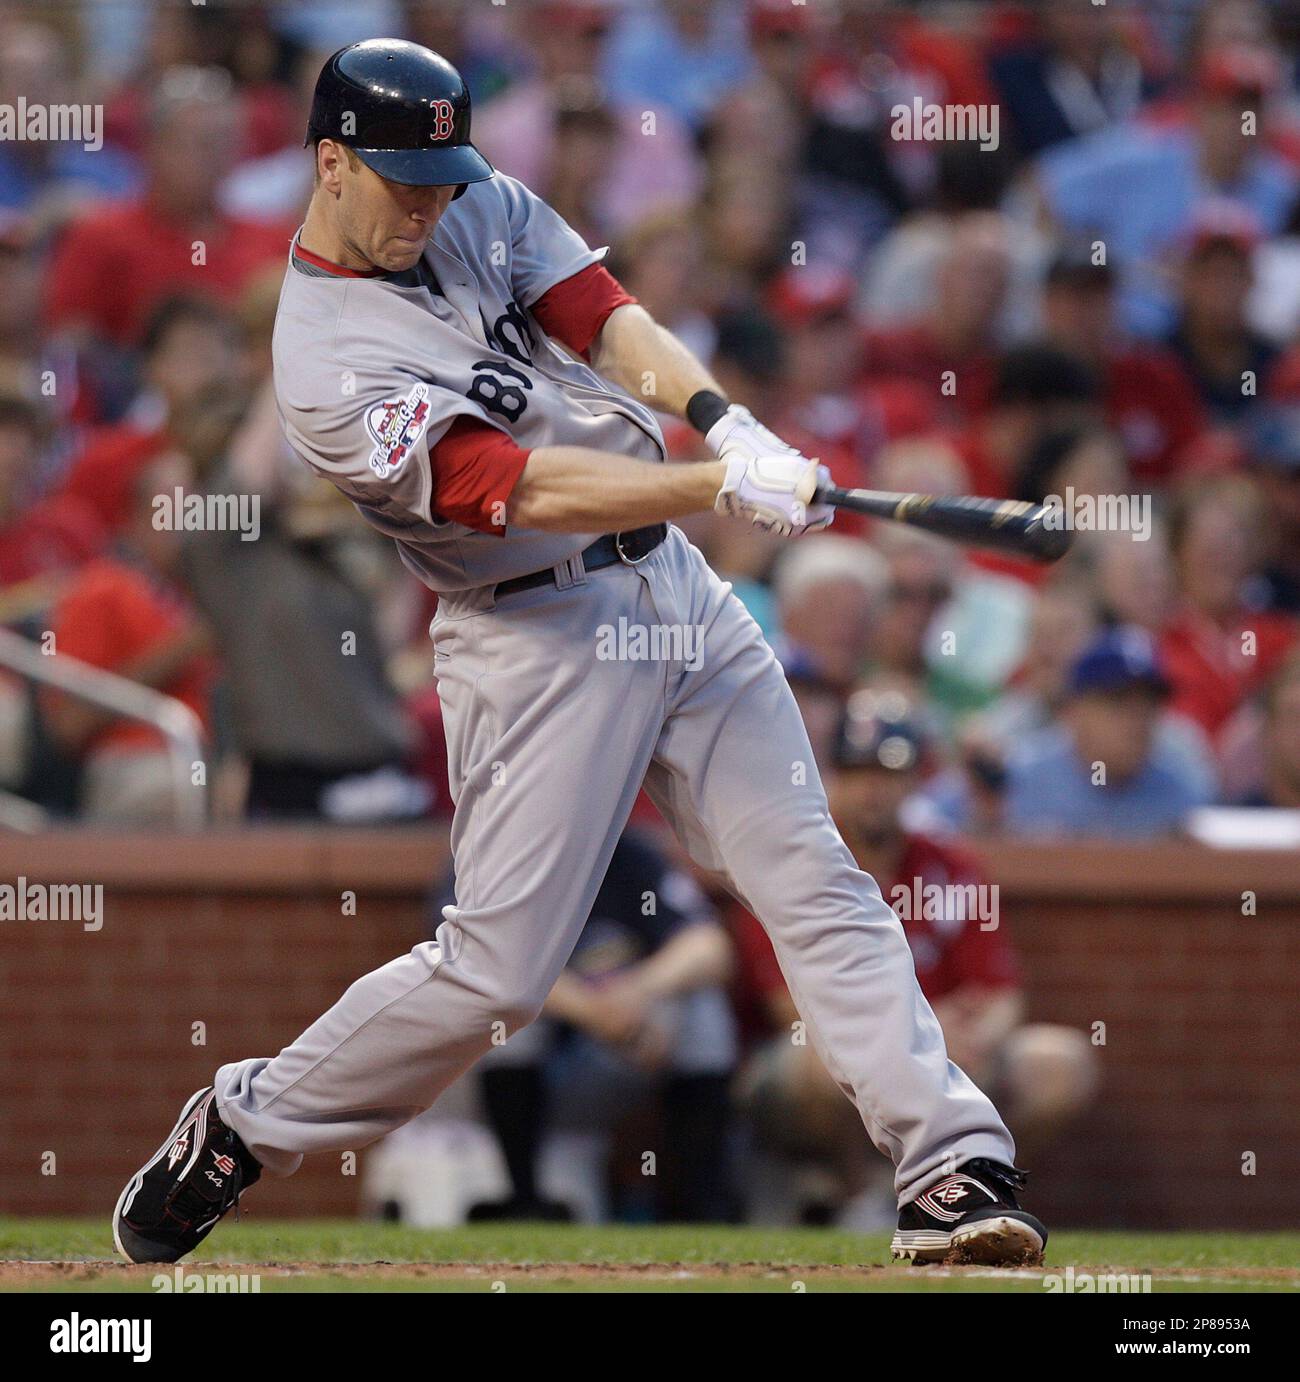 American League's Jason Bay of the Boston Red Sox hits a single